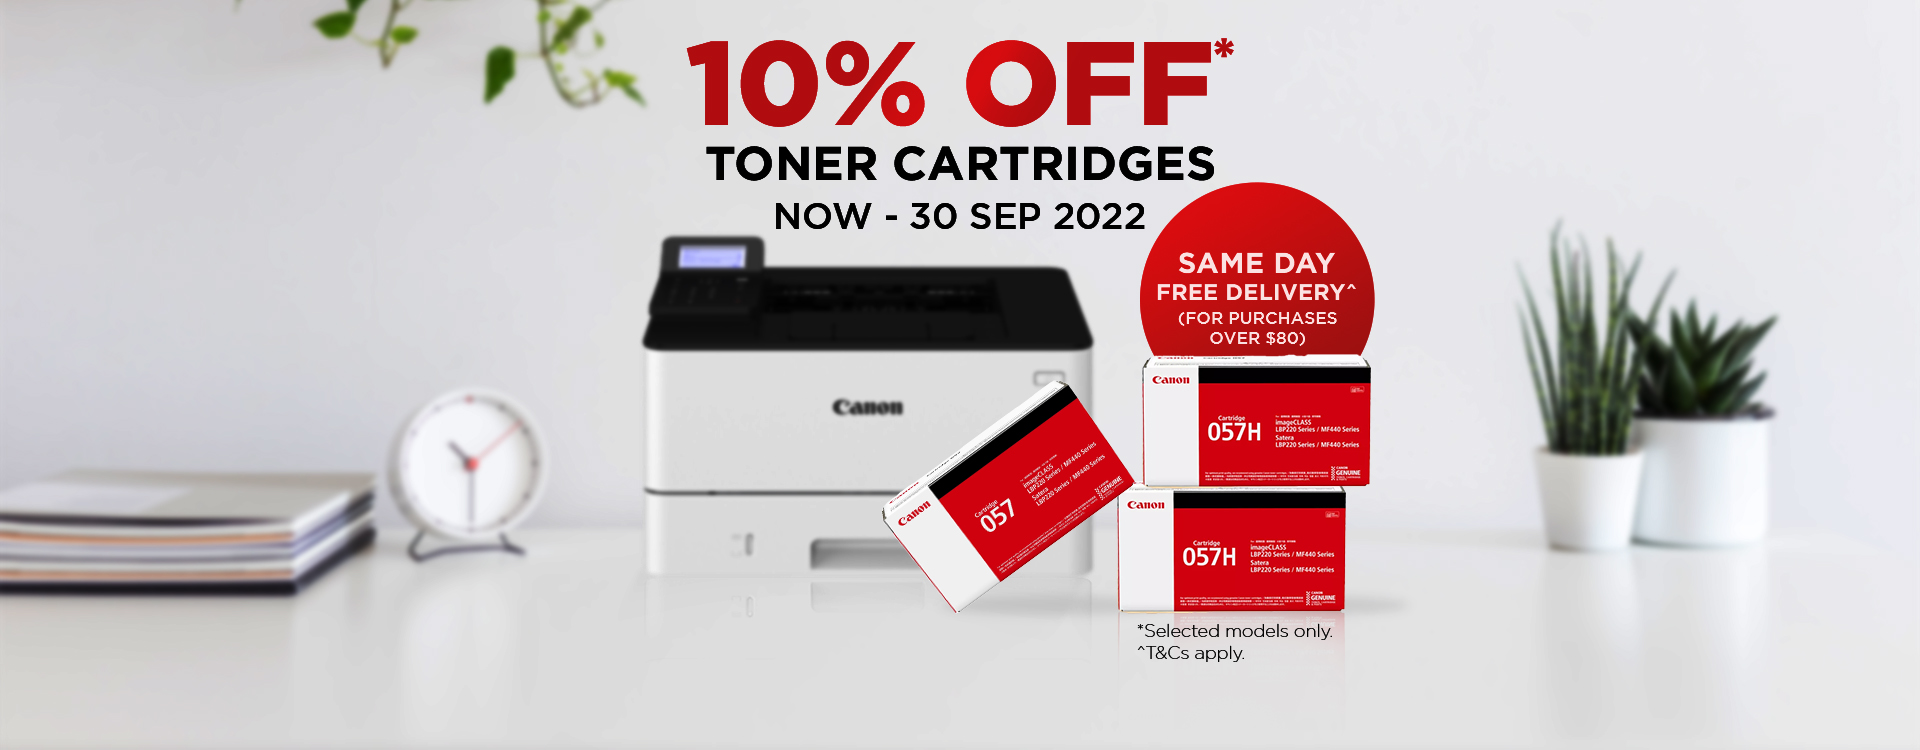 Toner Promo 1 July Corp Site Banner